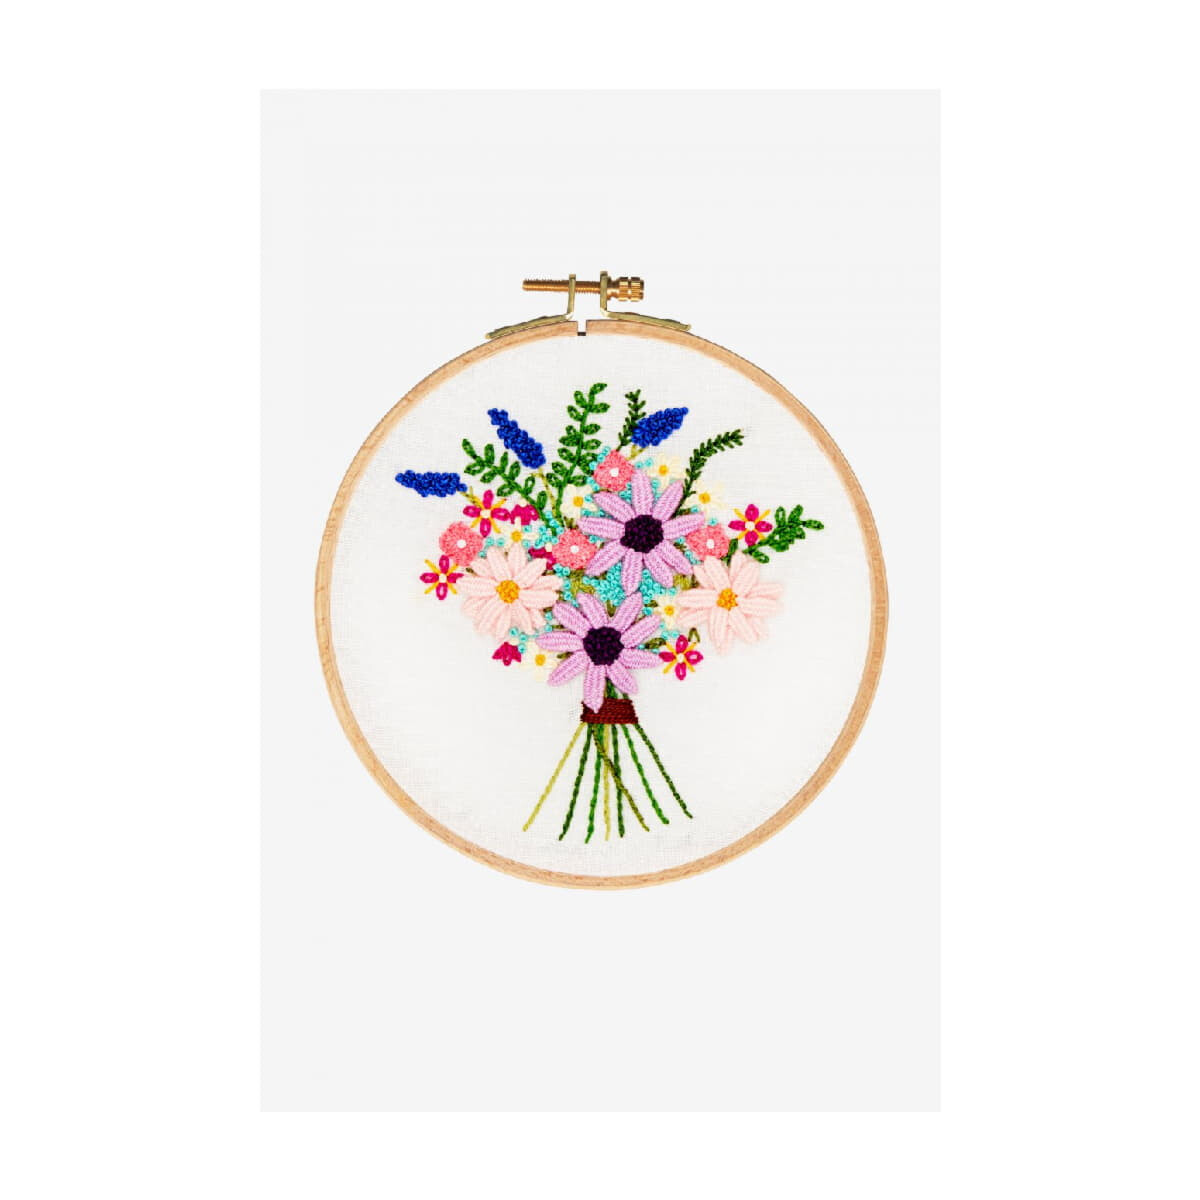 DMC stamped Stitch Kit Cosmos Bouquet with hoop, DIY